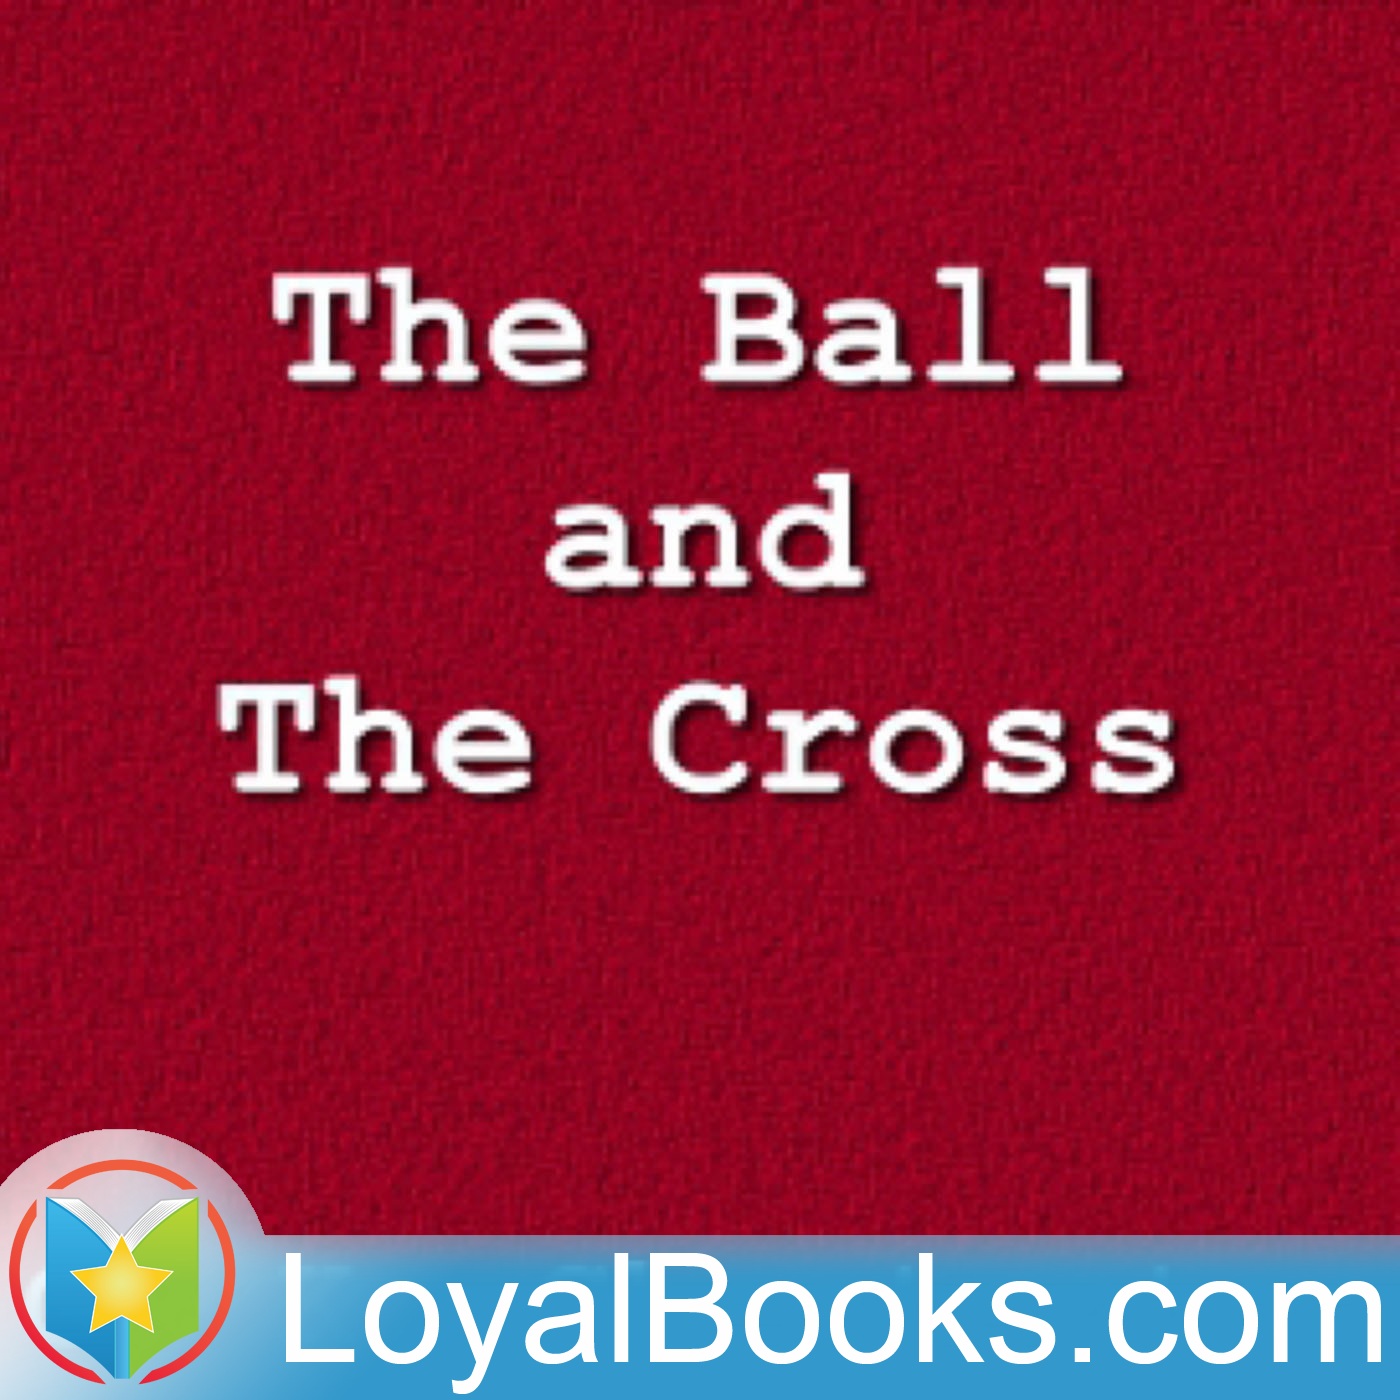 The Ball and the Cross by G. K. Chesterton